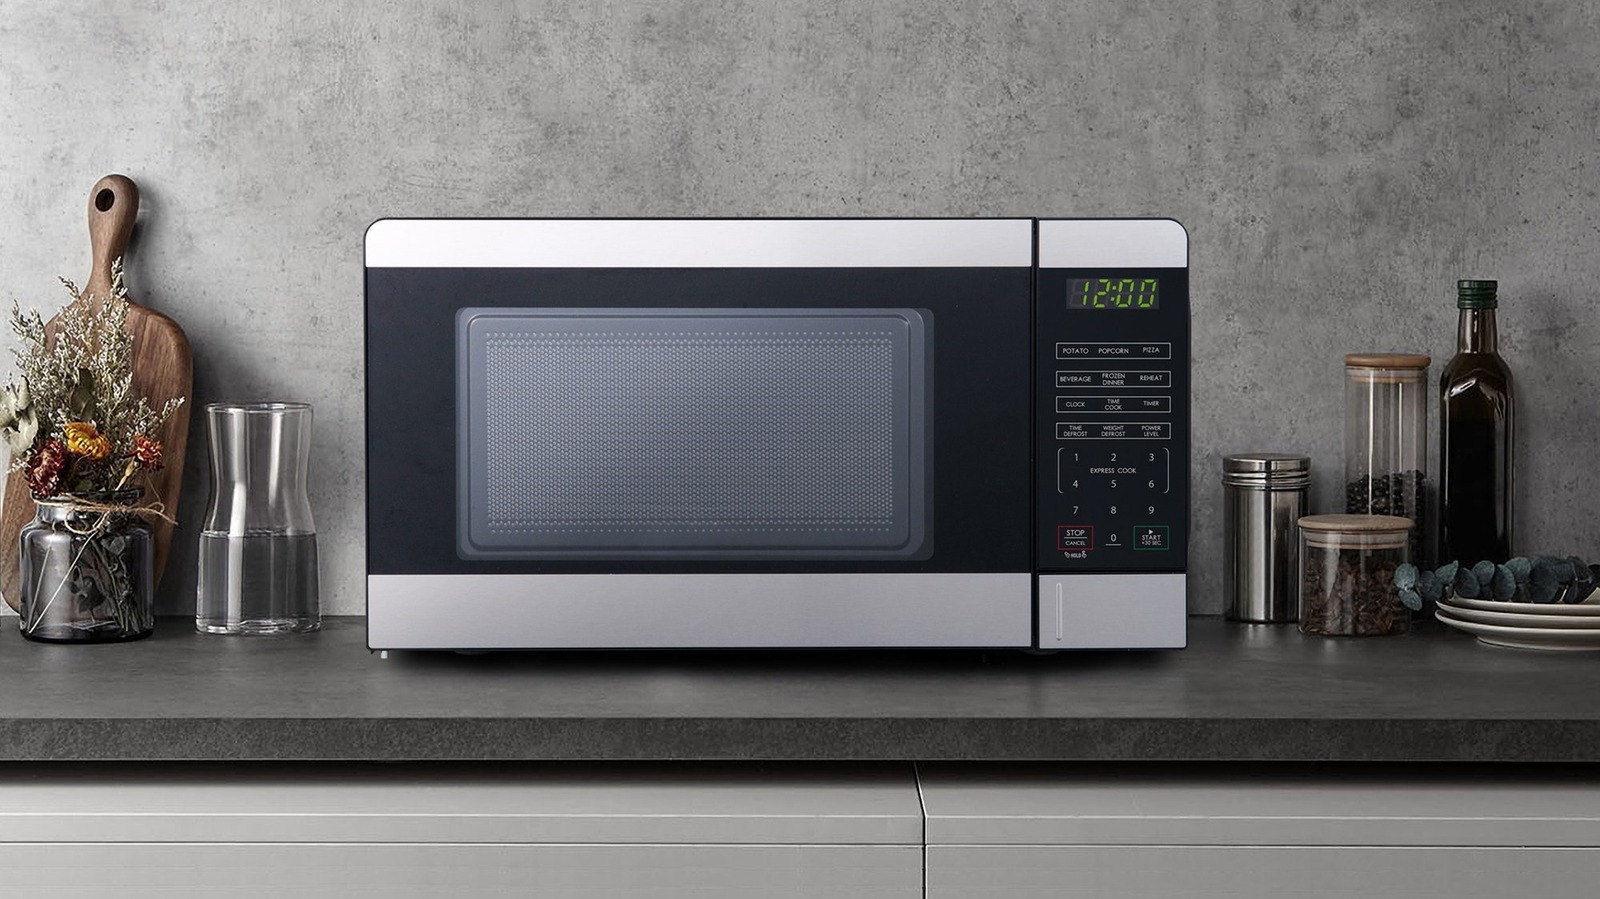 Step-by-Step Guide to Quieting Your Microwave - Quiet Hall